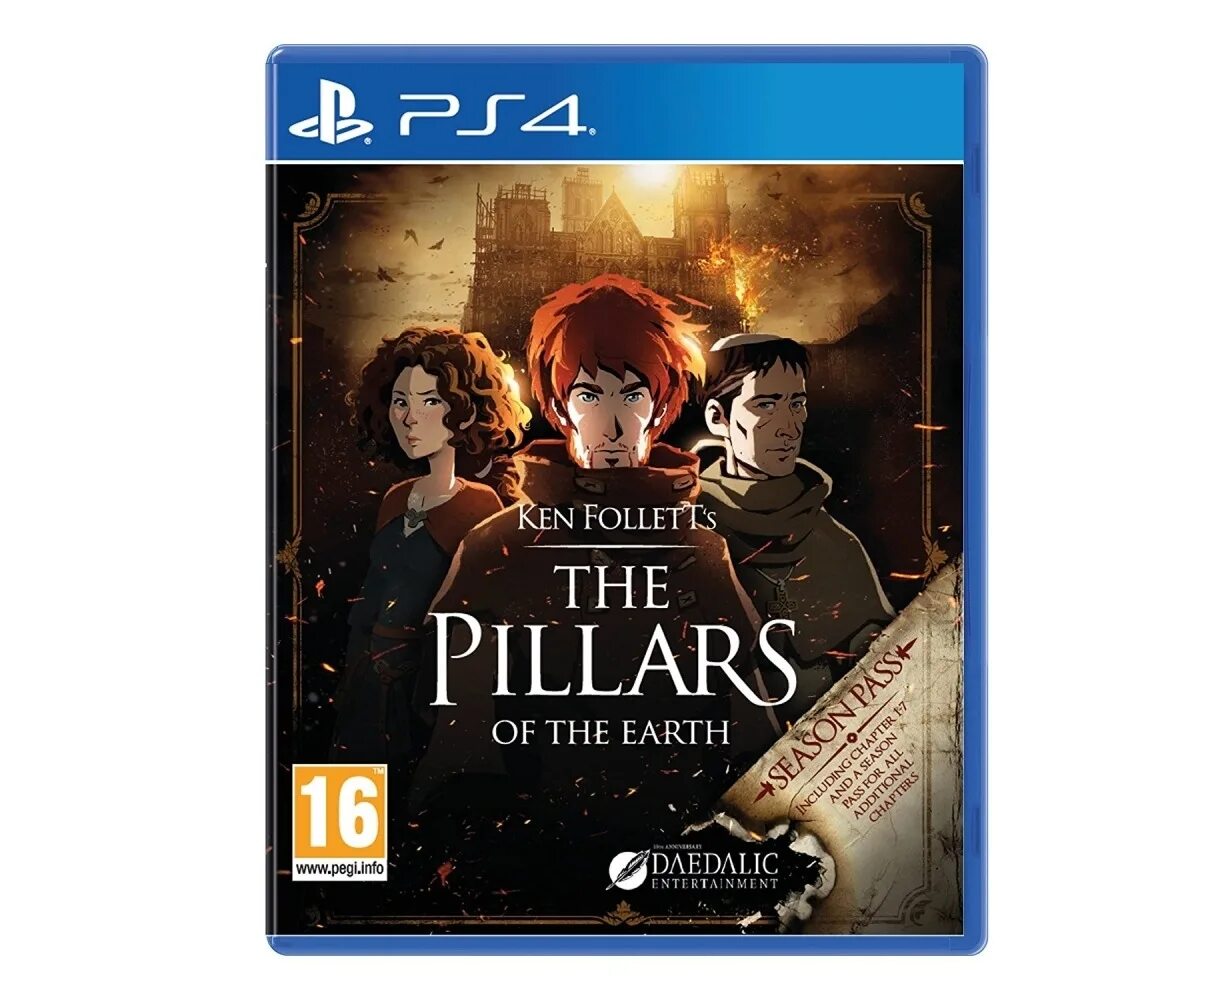 Just one earth на русском. The Pillars of the Earth игра. Ken Folletts the Pillars of the Earth. Ken Follett's the Pillars of the Earth игра сюжет. Ken Follett's the Pillars of the Earth арт.